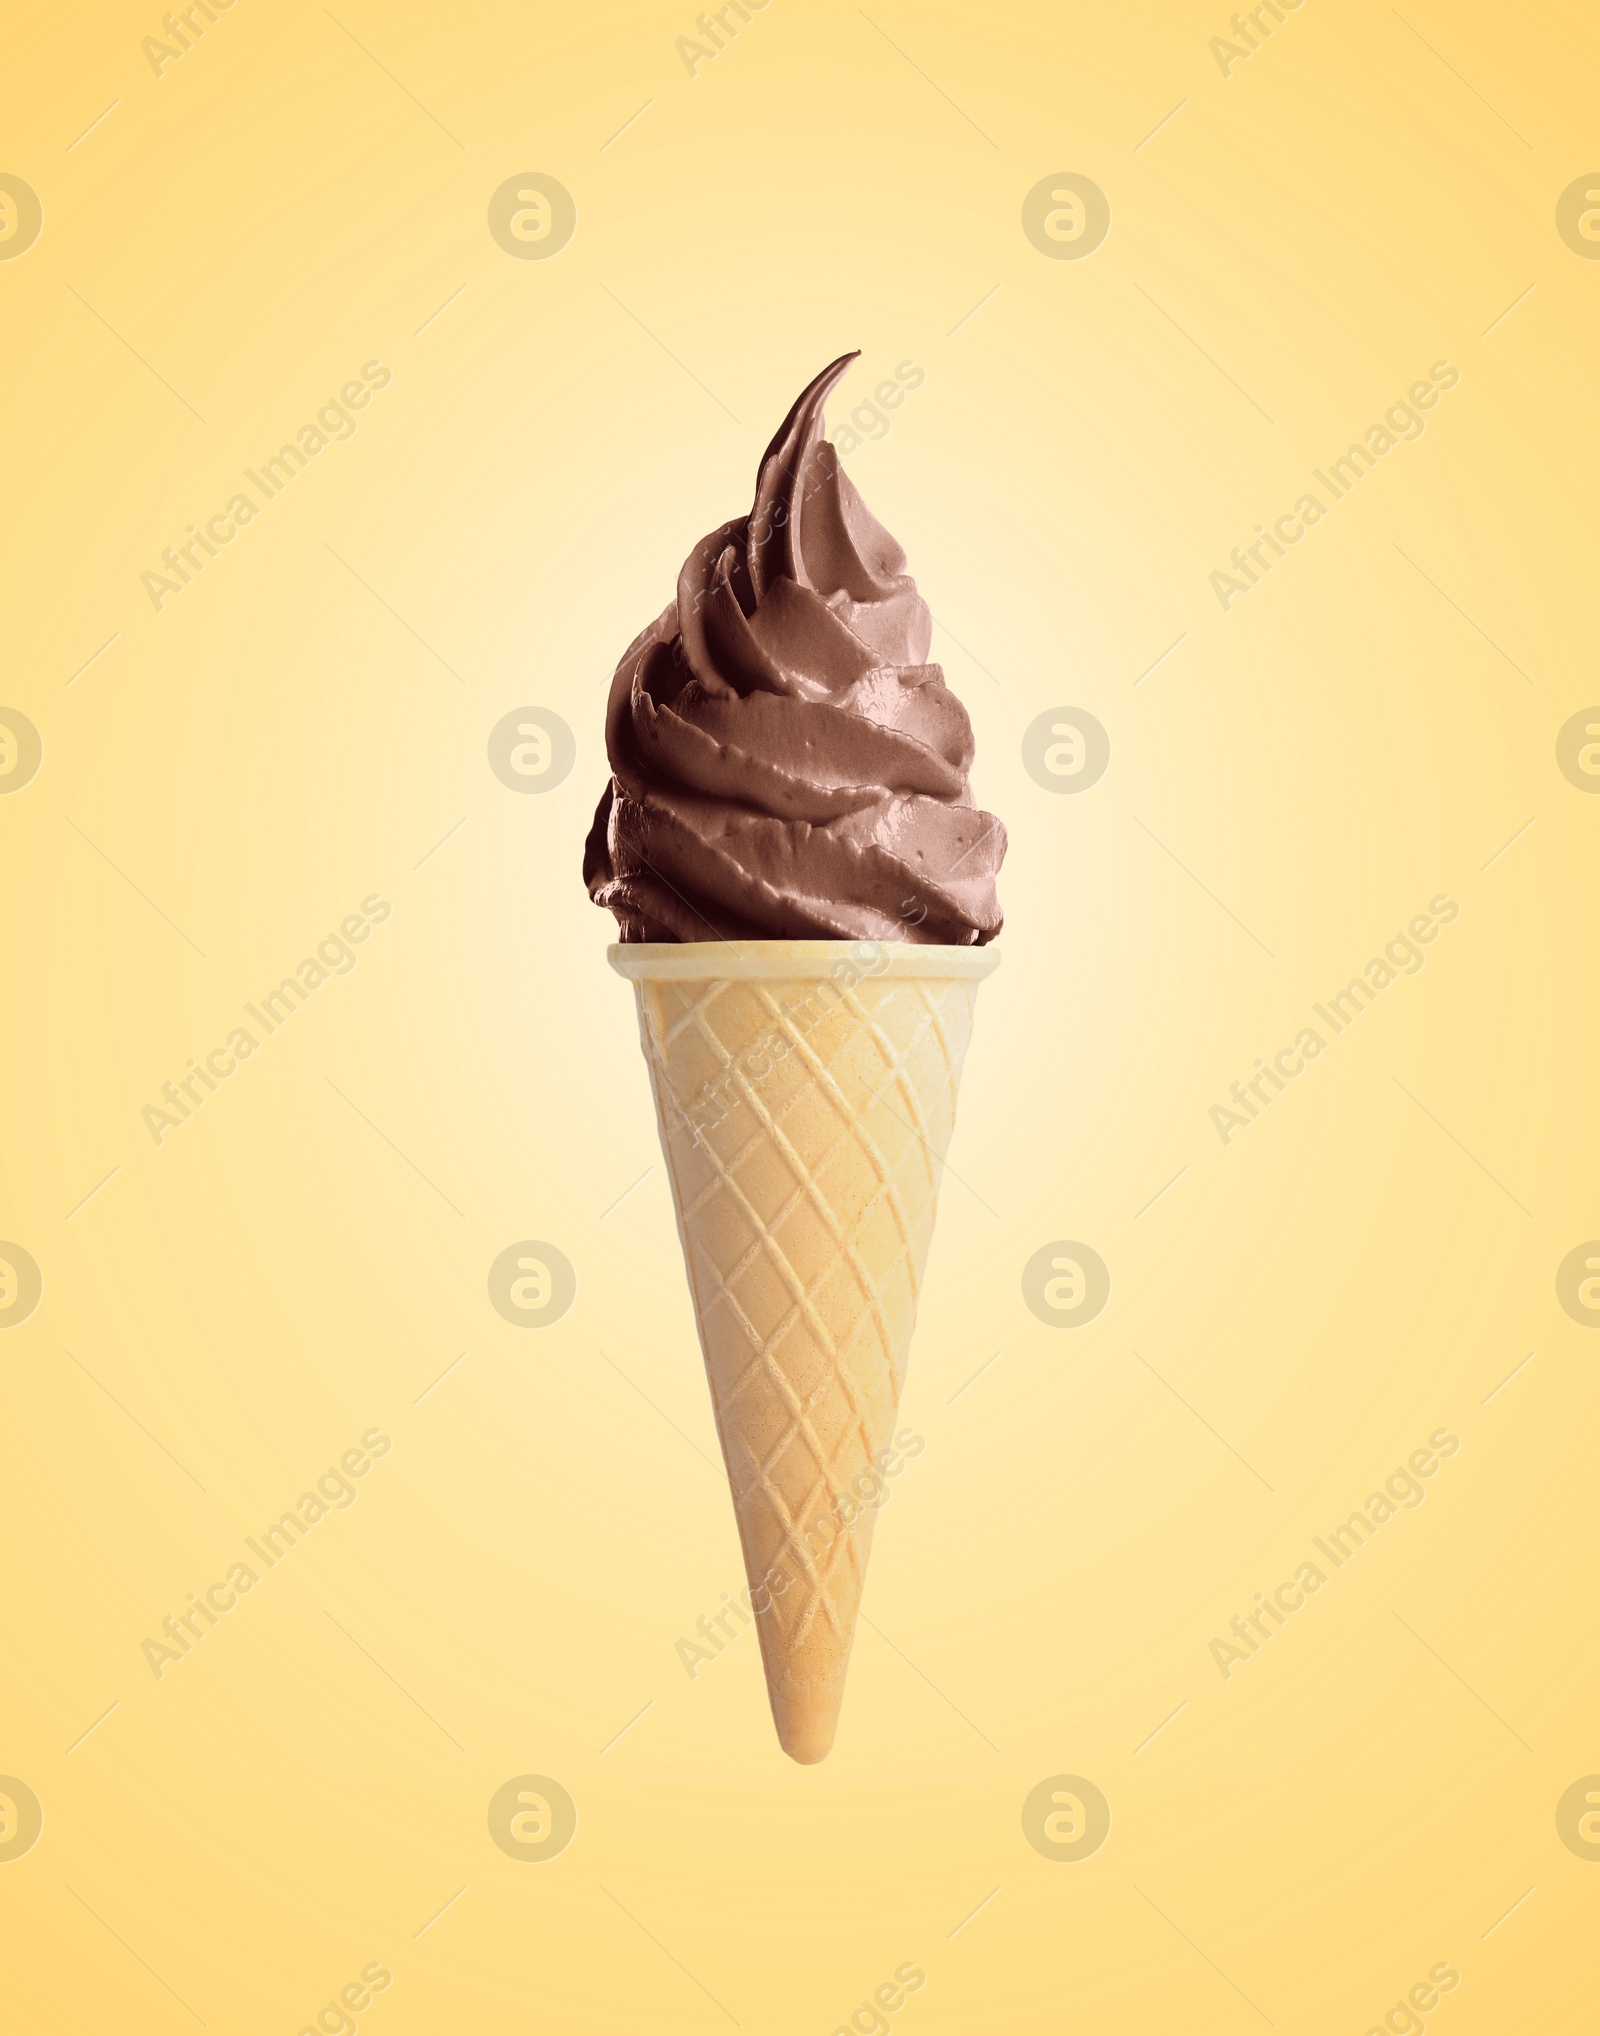 Image of Delicious soft serve chocolate ice cream in crispy cone on pastel golden background